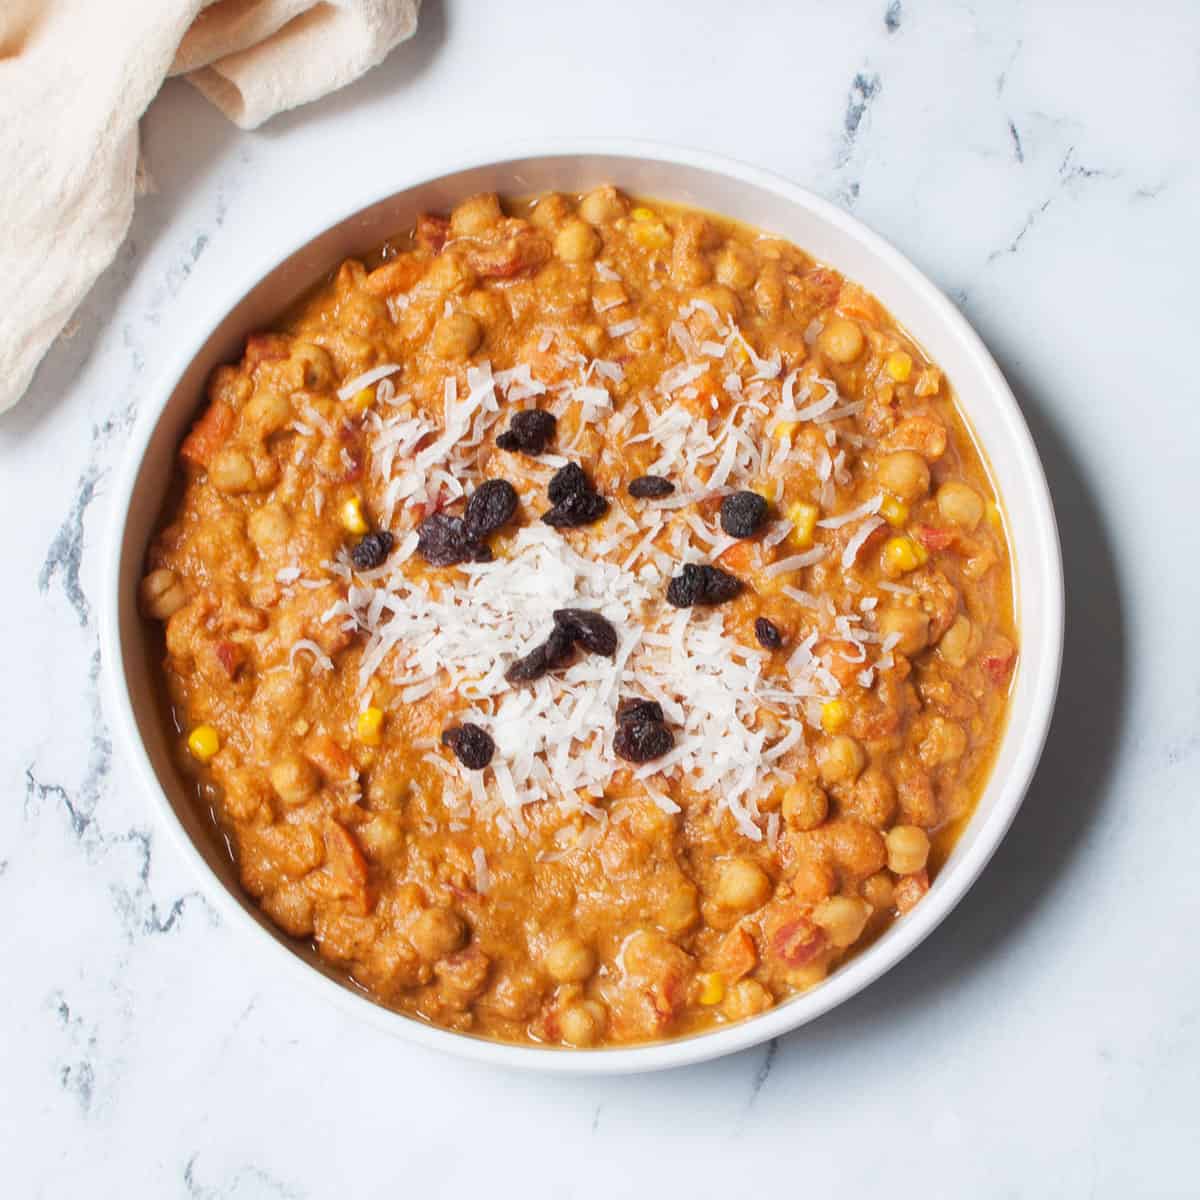 Pumpkin chickpea curry in a large white bowl topped with raisins and shredded coconut flakes.